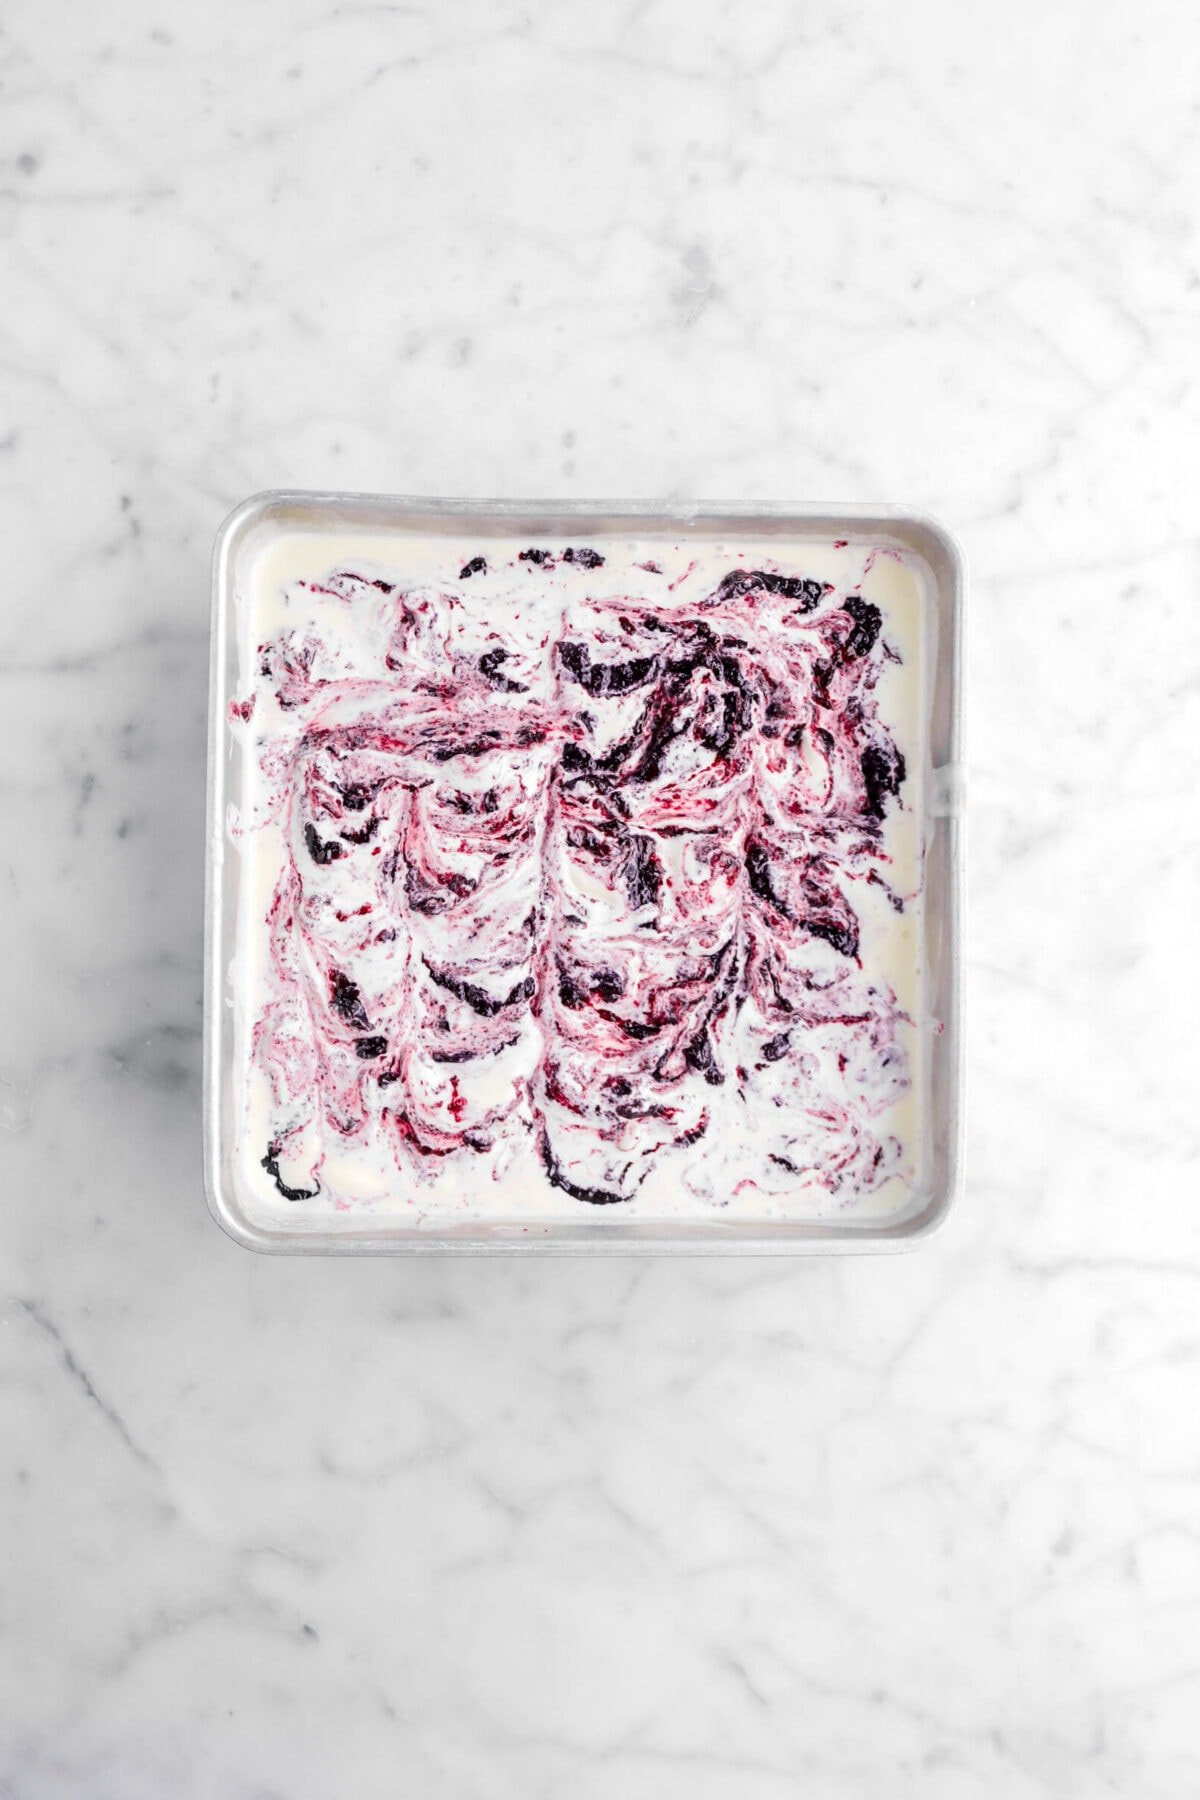 blueberry jam swirled into ice cream in square pan an on marble surface